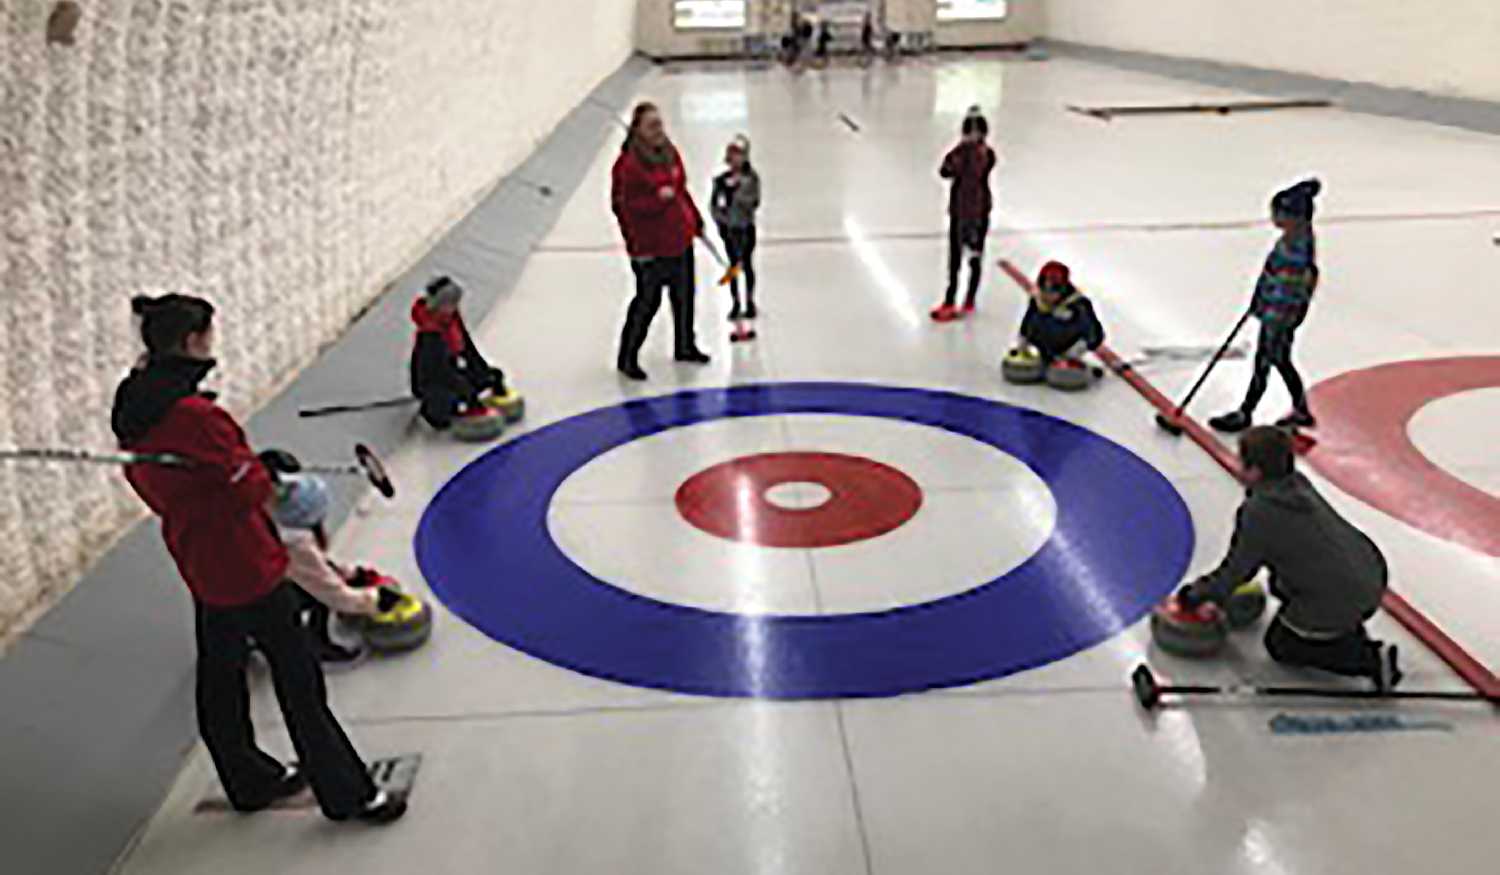 Scenes from a curling clinic in Maryfield in early 2020.